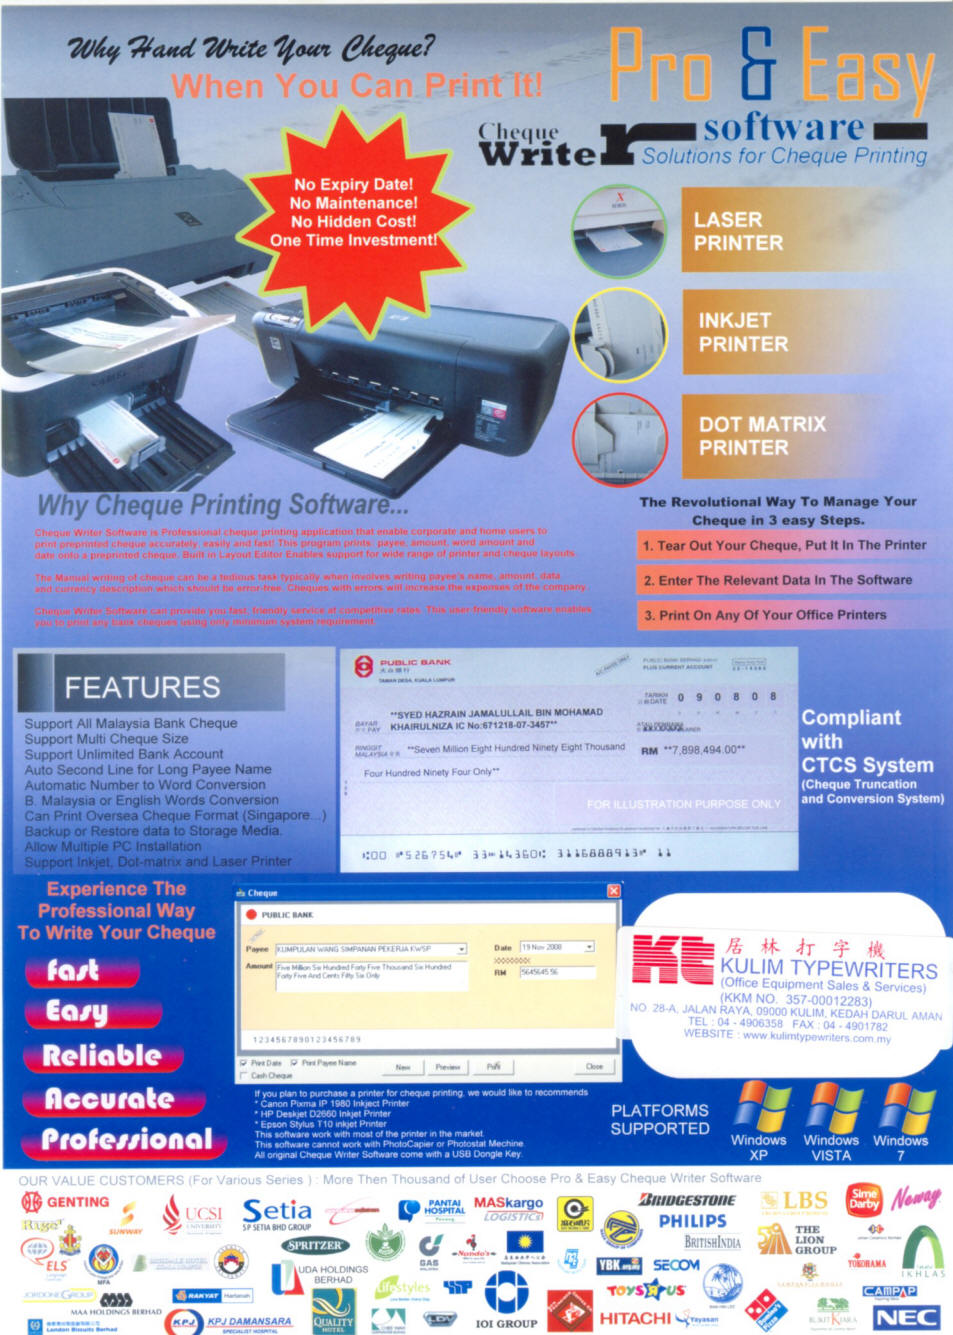 Pro & Easy Cheque Printing Software